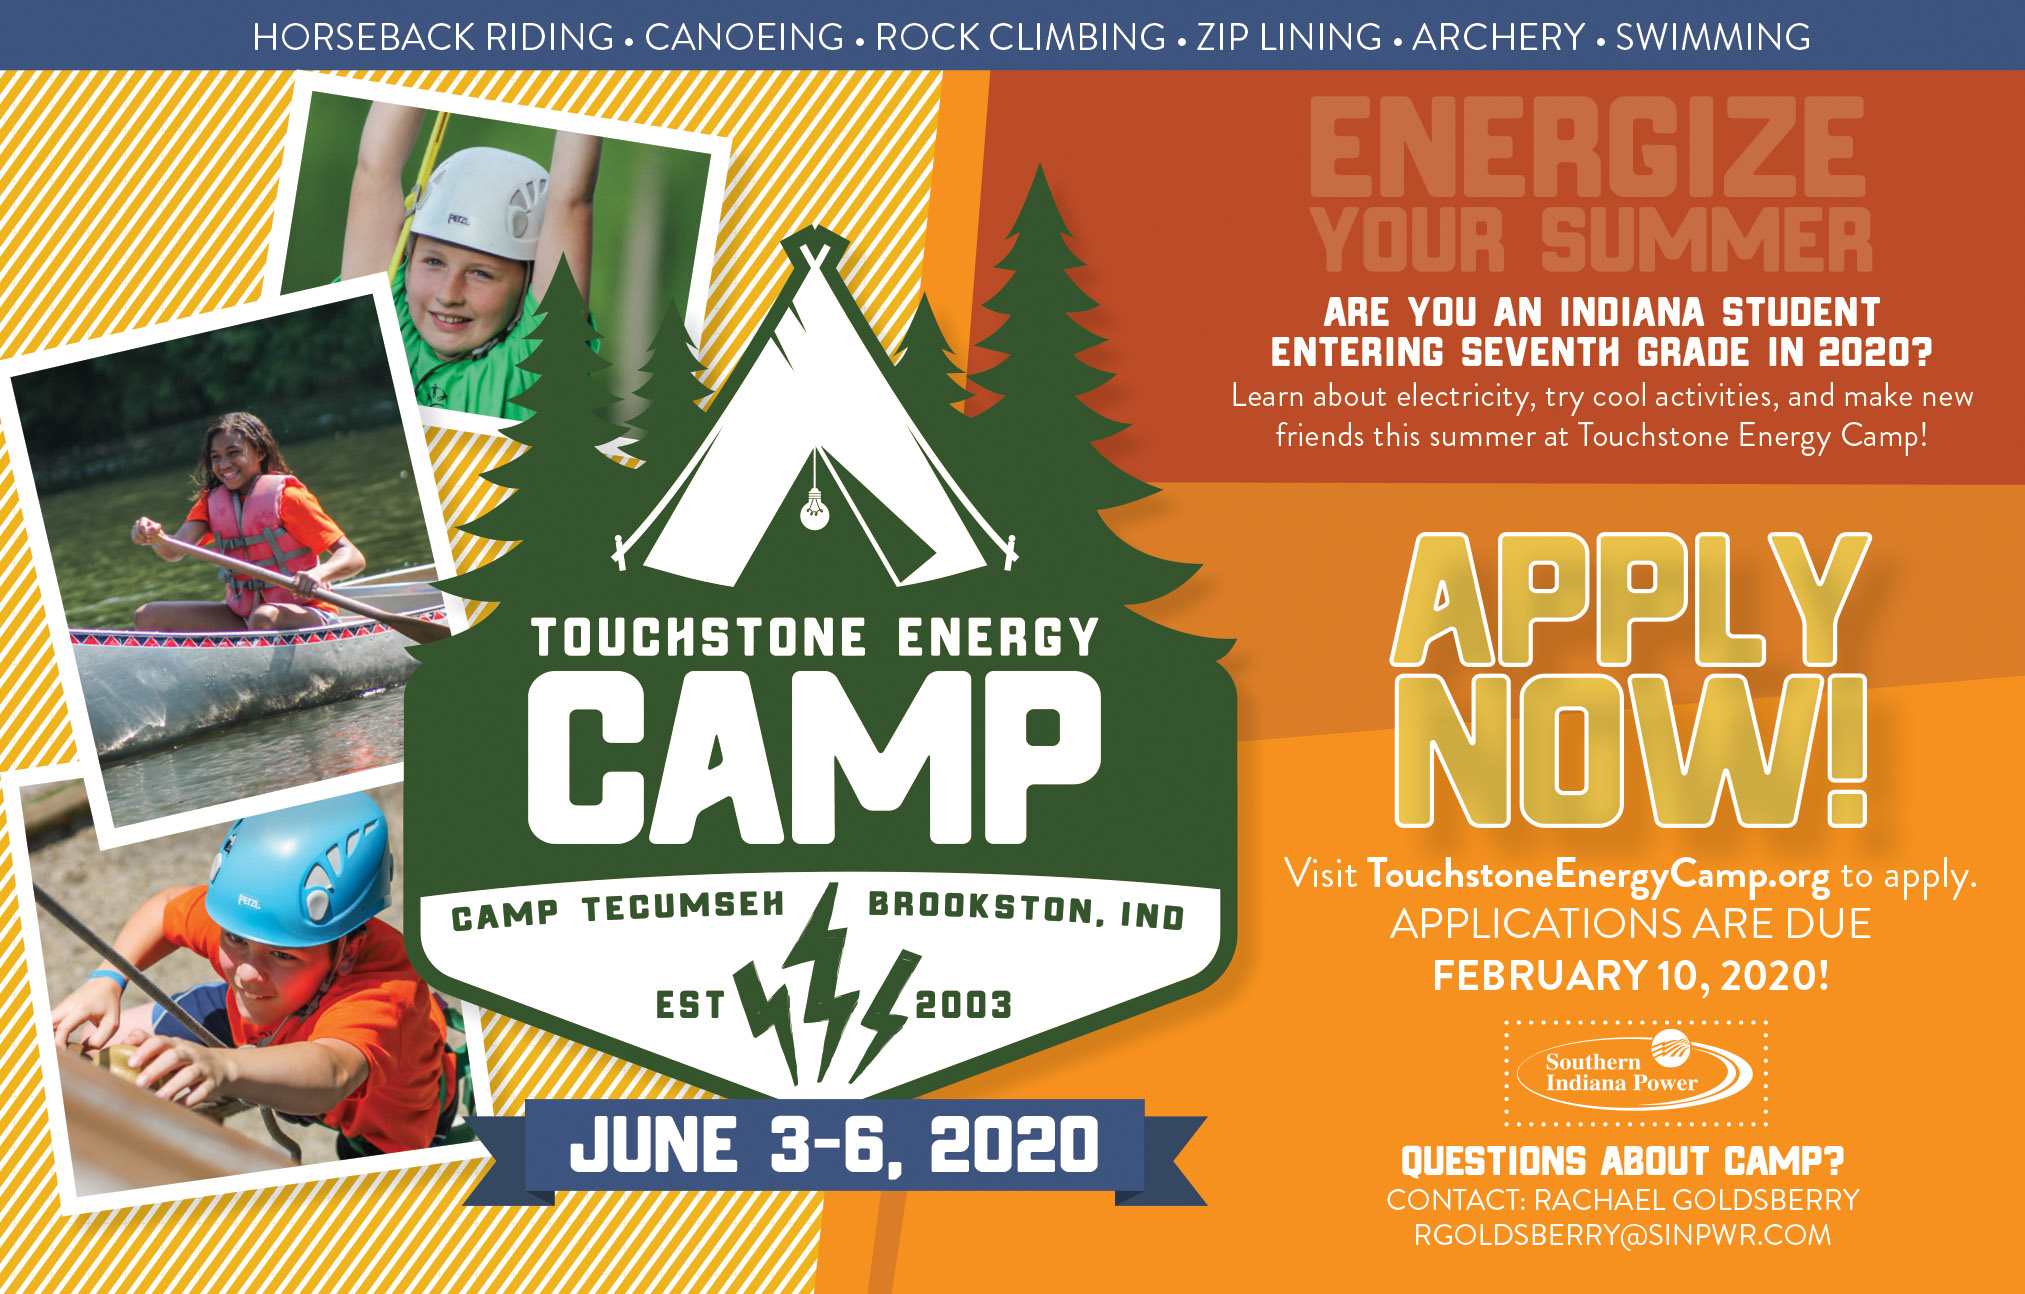 Ad for Touchstone Energy Camp